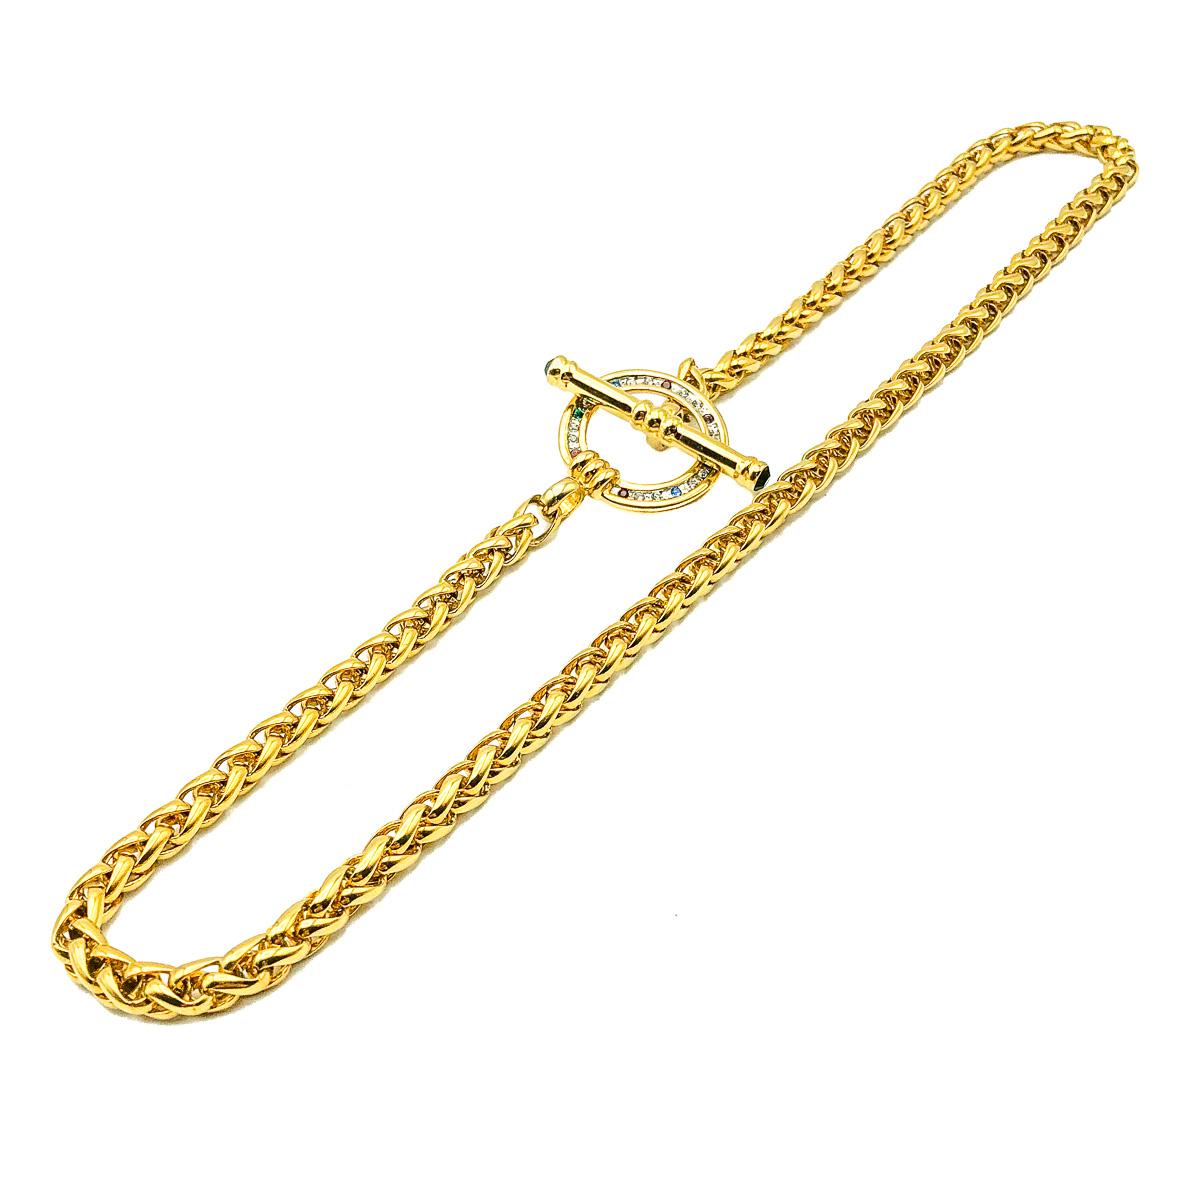 A Vintage Crystal Bar & Toggle Chain. Crafted in gold plated metal with a feature toggle fastener finished with white and coloured crystals. Substantial and wonderful quality. Very good vintage condition, 49cms. Wonderfully stylish for all